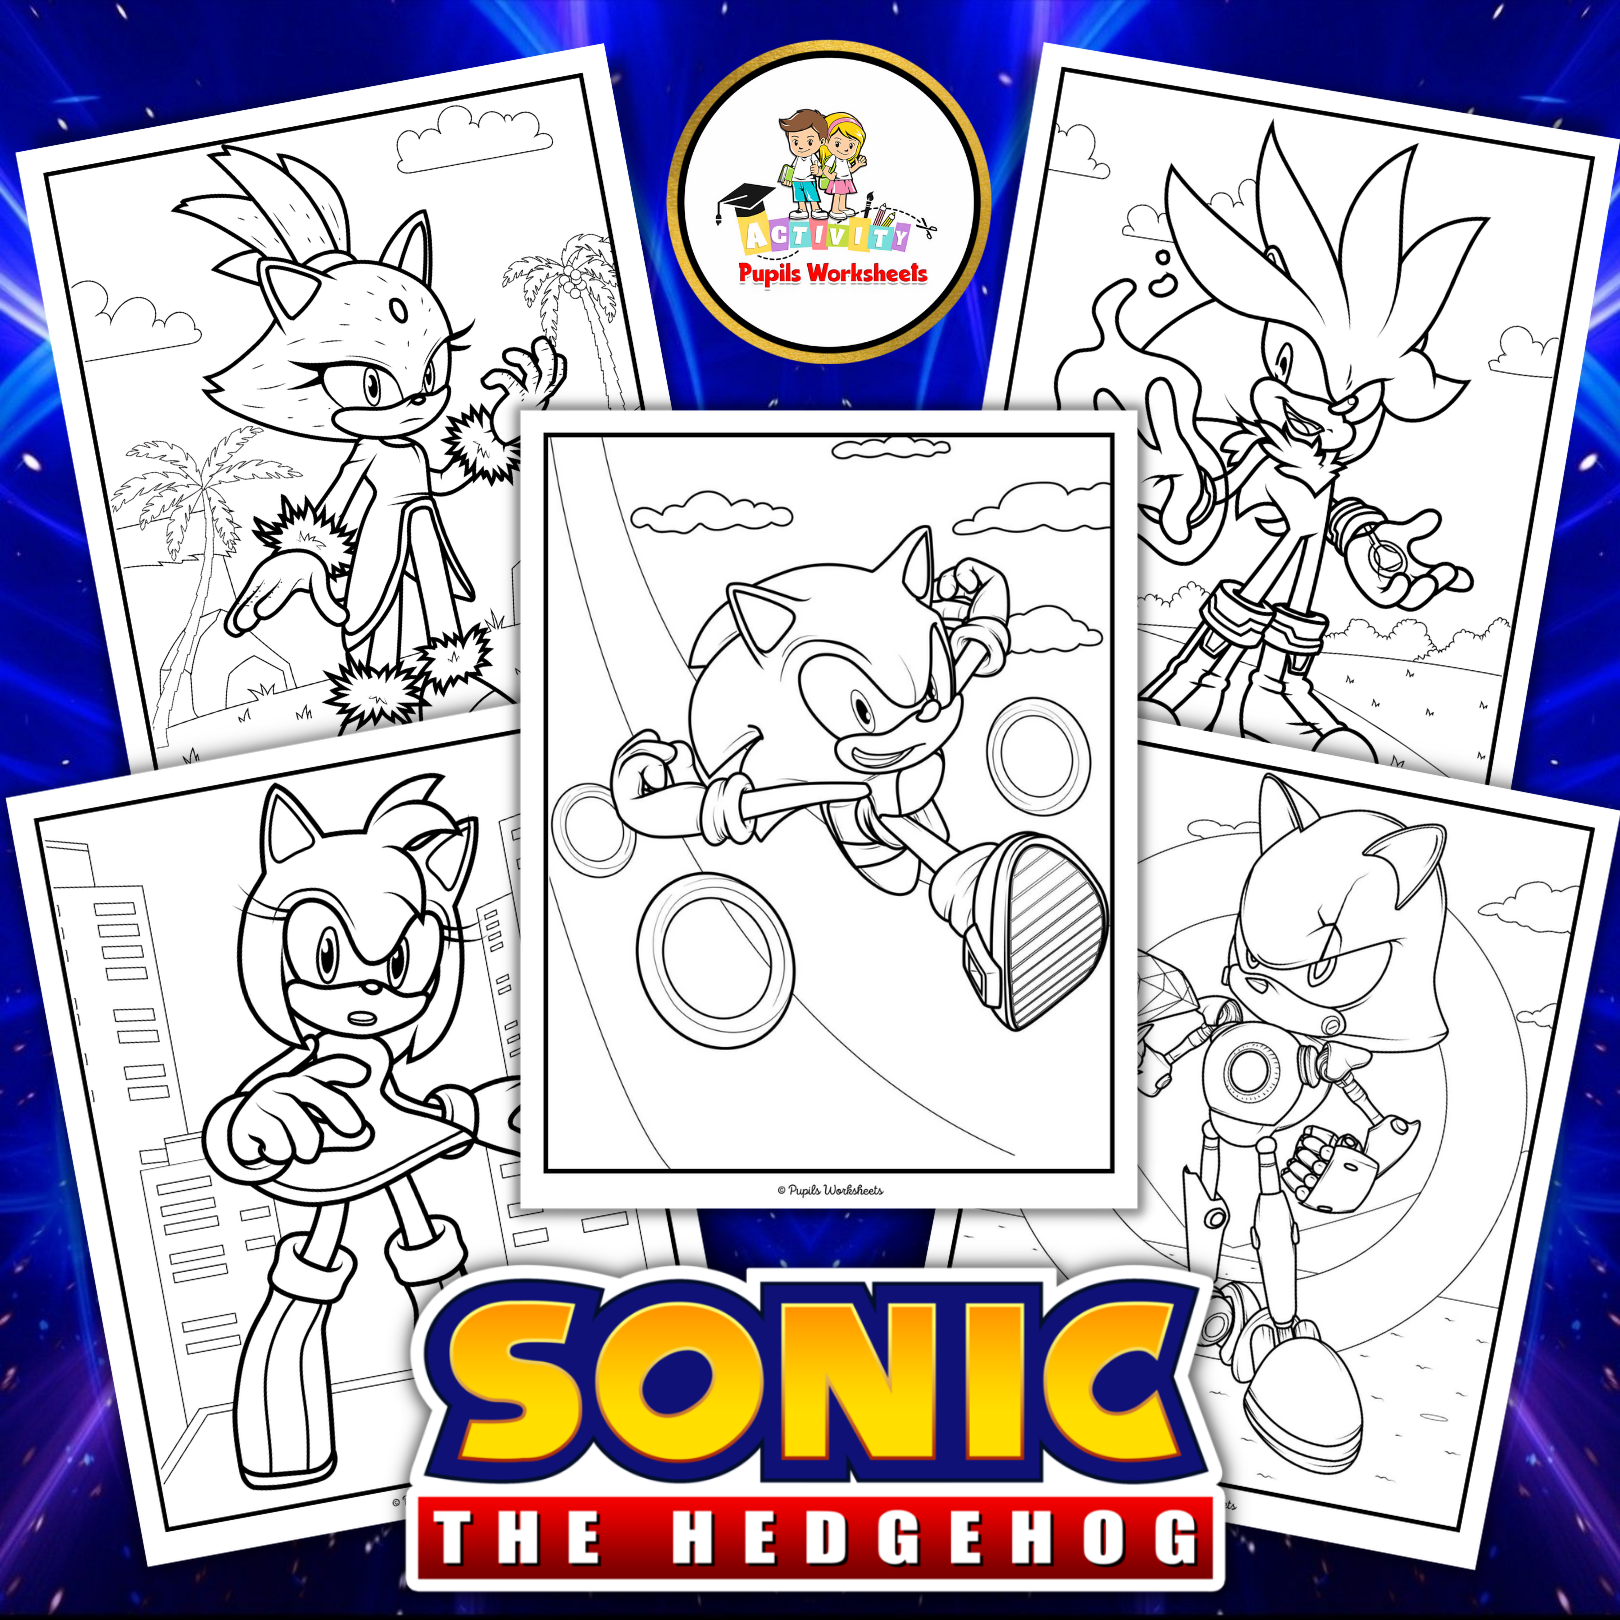 Sonic hedgehog characters coloring pages i printable fun coloring activities teaching resources